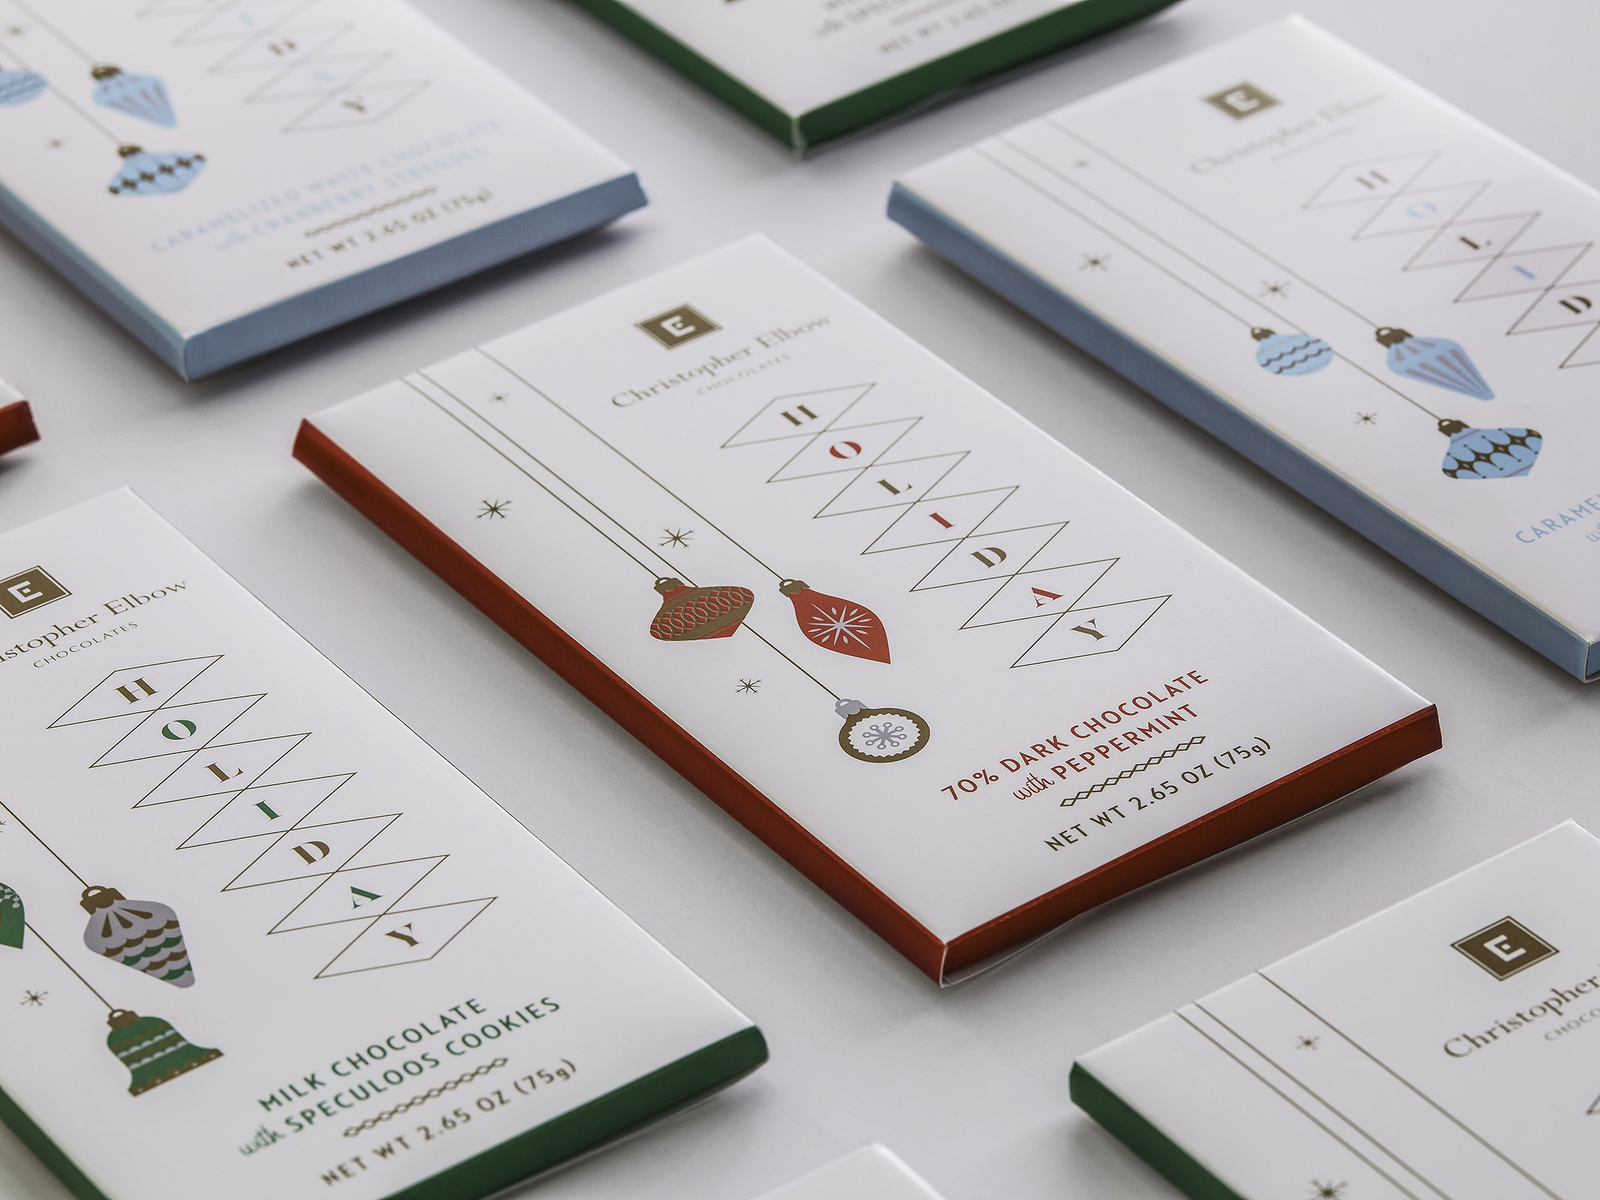 Christopher Elbow Holiday Chocolate Bars by Joe Wilper on Dribbble